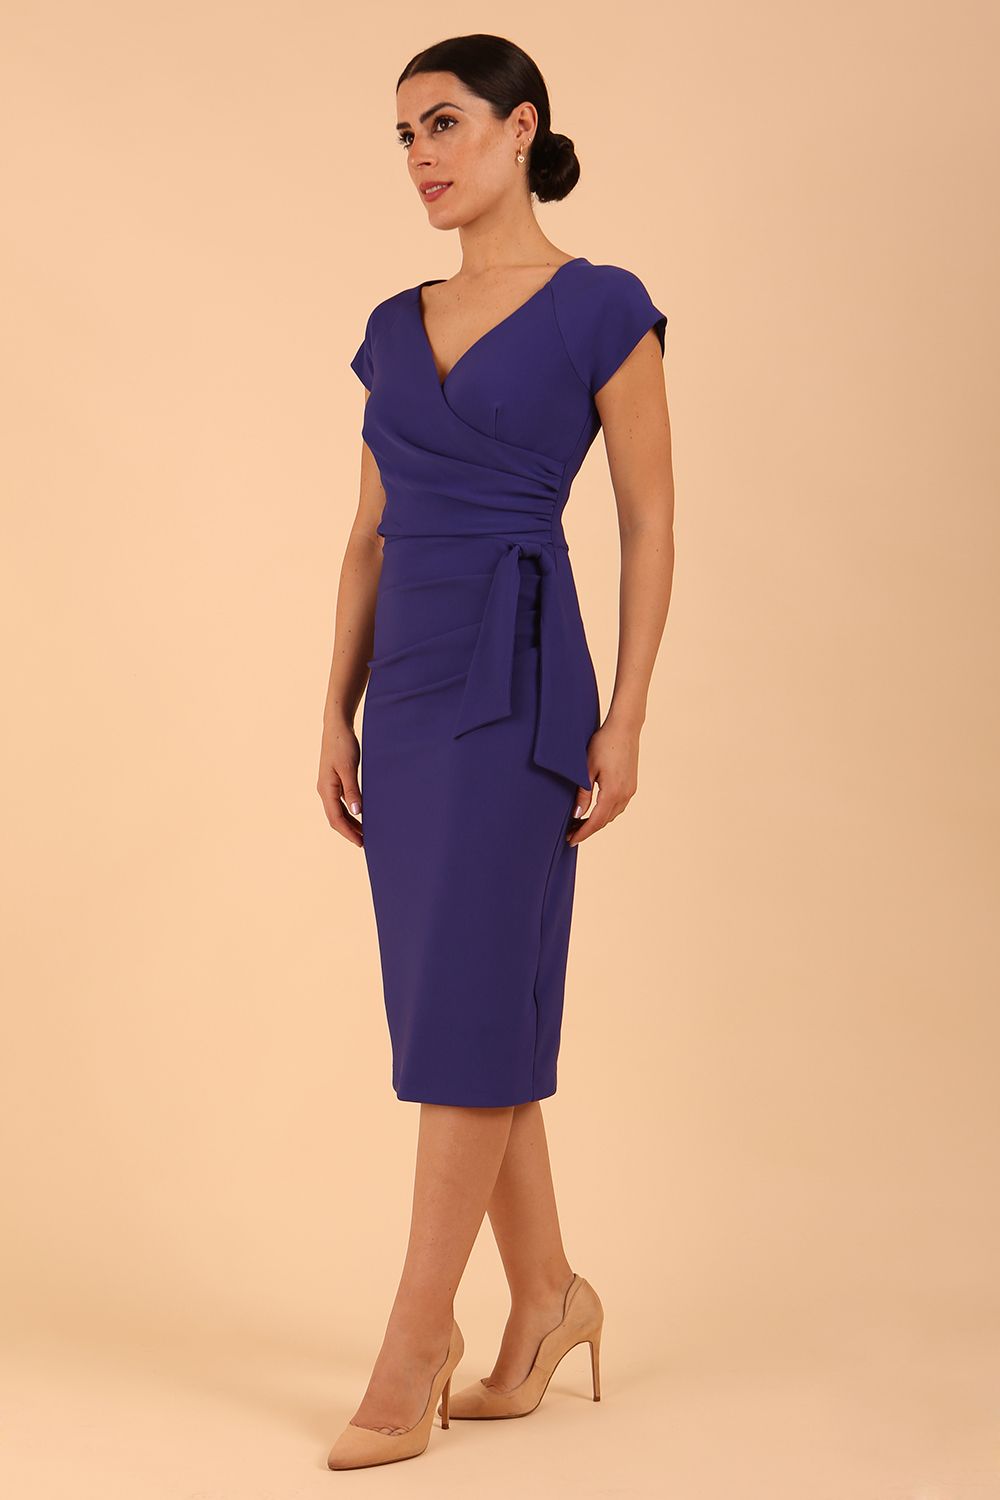 Model wearing diva catwalk Syon Short Sleeved Pencil Dress with tie detail at the waist area in Deep Orient Blue colour front side